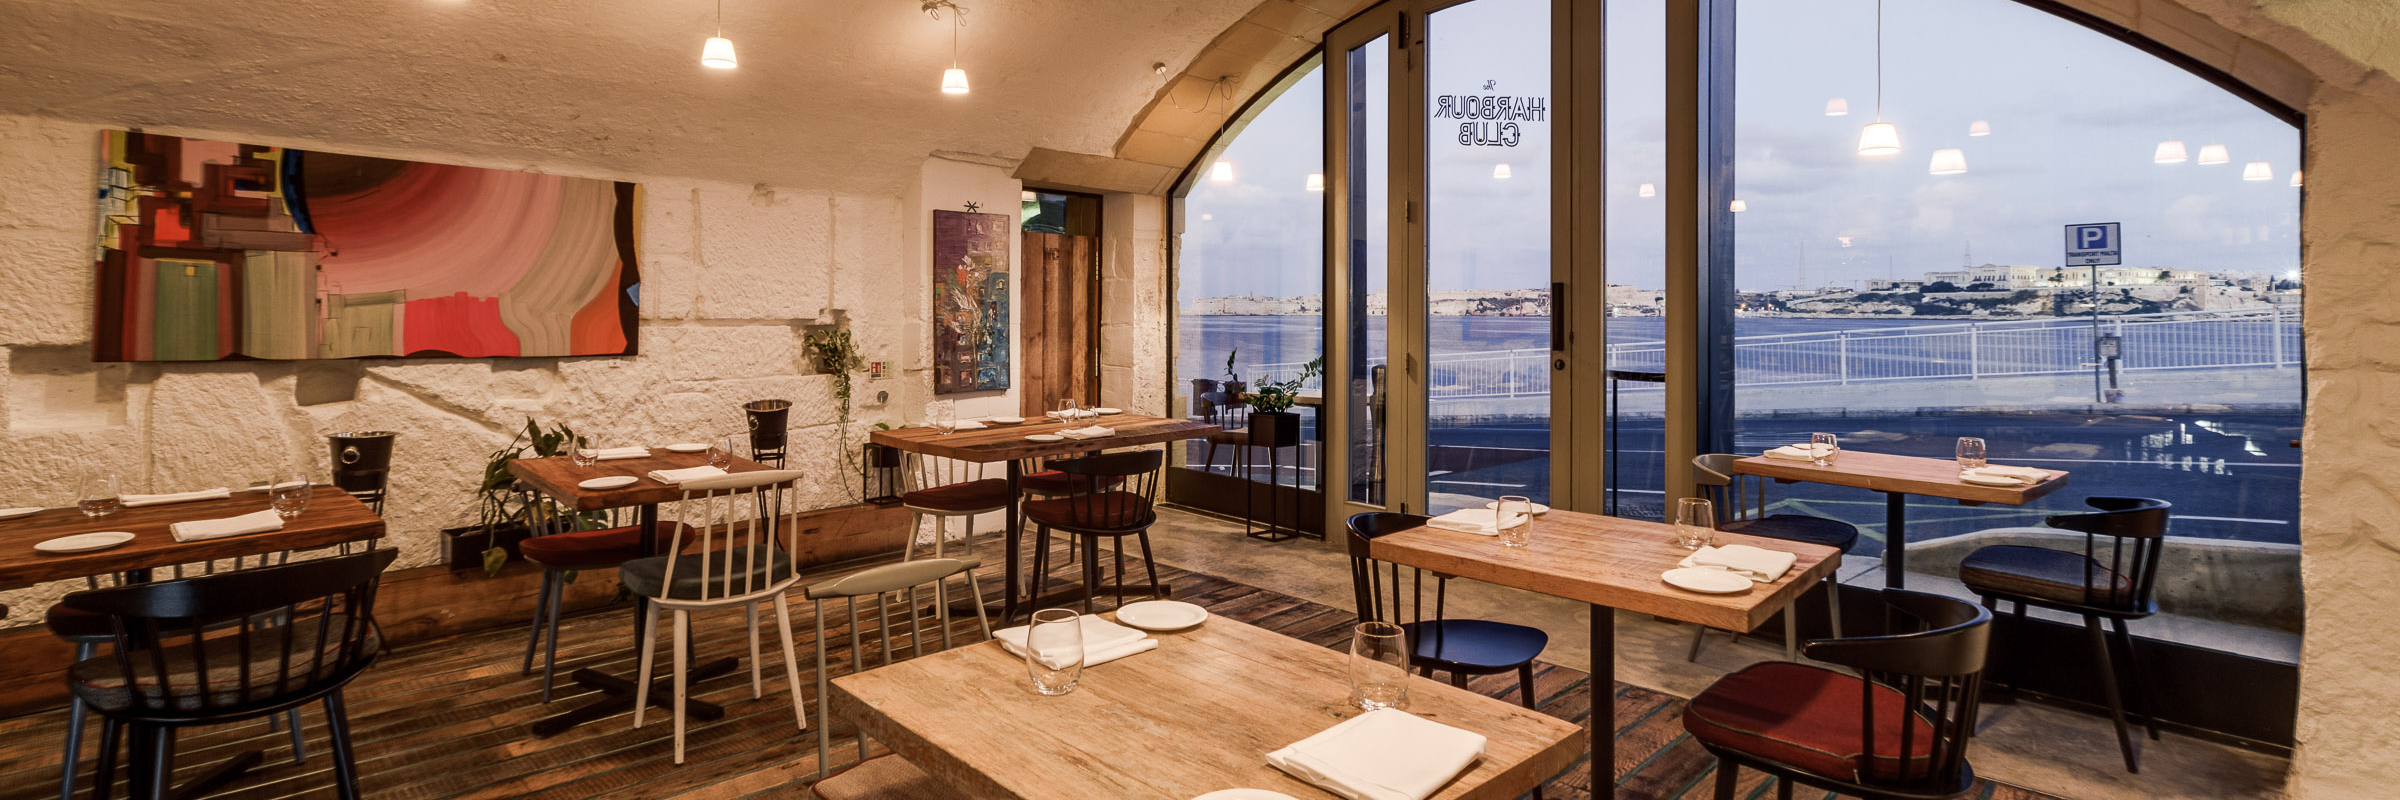 The Harbour Club - Malta restaurants with a view